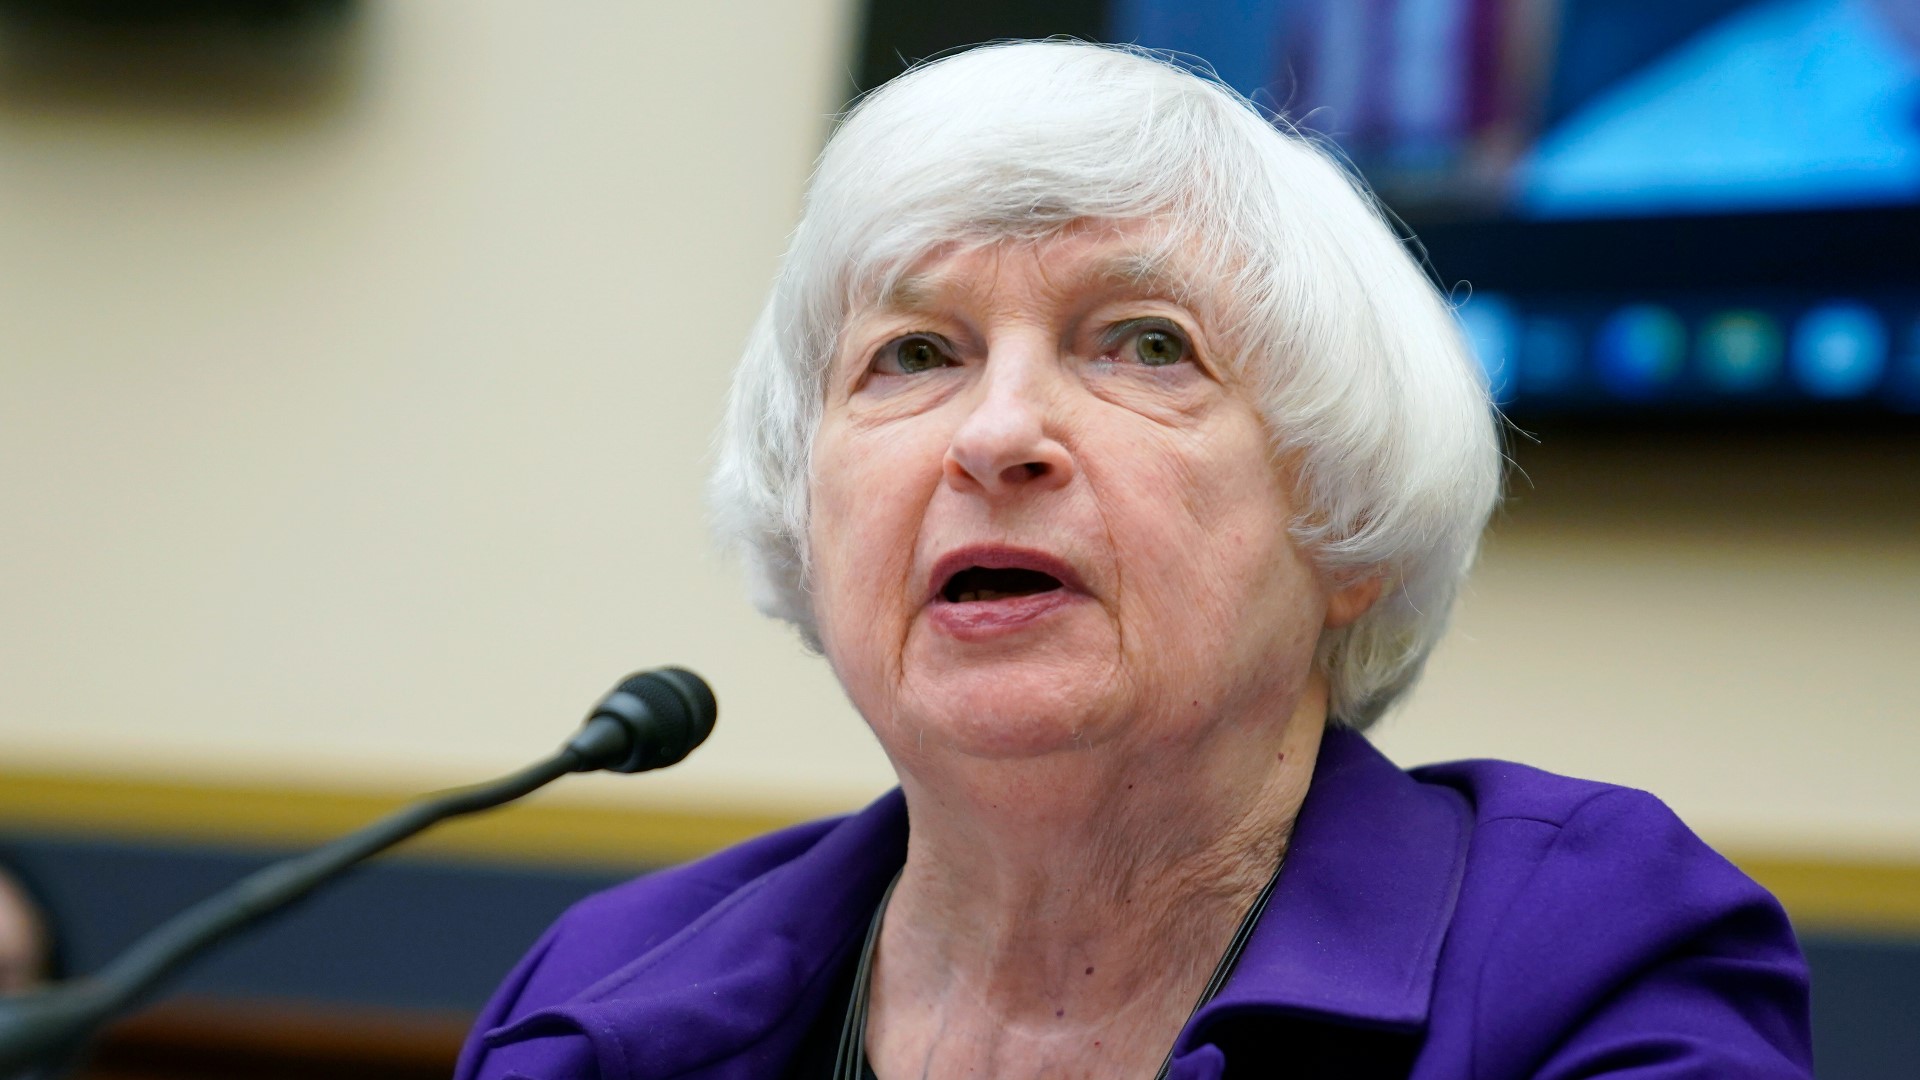 Secretary Yellen will be in Fort Worth to unveil the first U.S. currency notes signed by her.